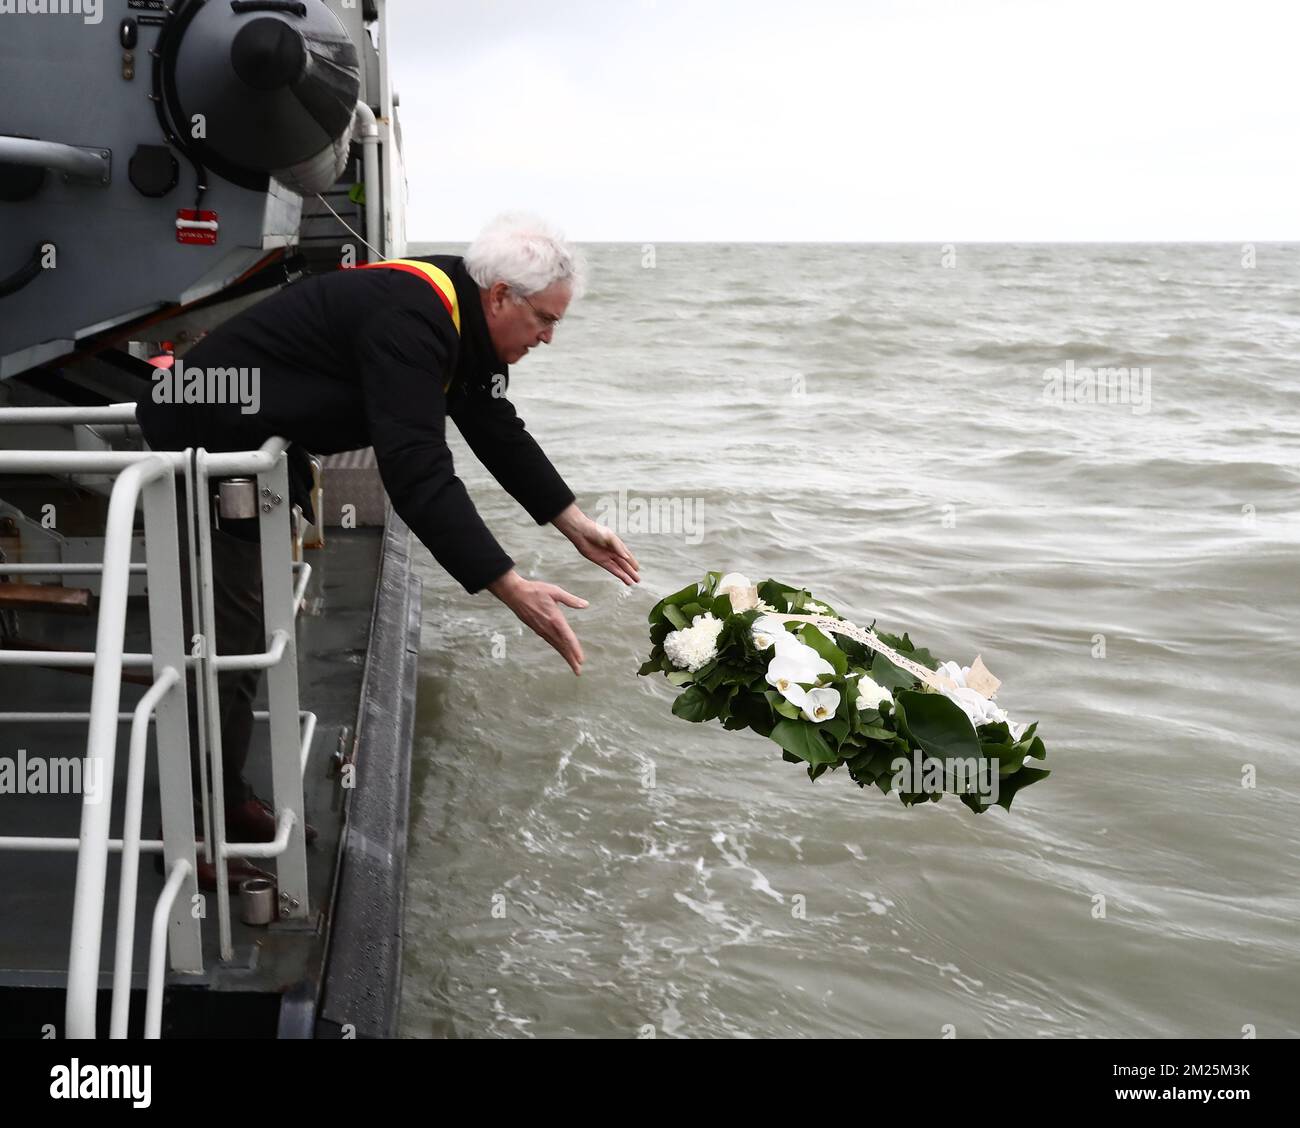 West-Flanders province governor Carl Decaluwe throws a wreath (flowers) to the sea at a ceremony for the 30th anniversary of the Herald of Free Enterprise ferry disaster, on Monday 06 March 2017 in Zeebrugge. On 6 March 1987 the ferry left the harbor of Zeebrugge, bound for Dover with more than 450 passengers and 80 crew members on board. It capsized just outside the harbor. The disaster, which was caused by the failure to close the bow doors, cost the life of 194 people. BELGA PHOTO KURT DESPLENTER  Stock Photo